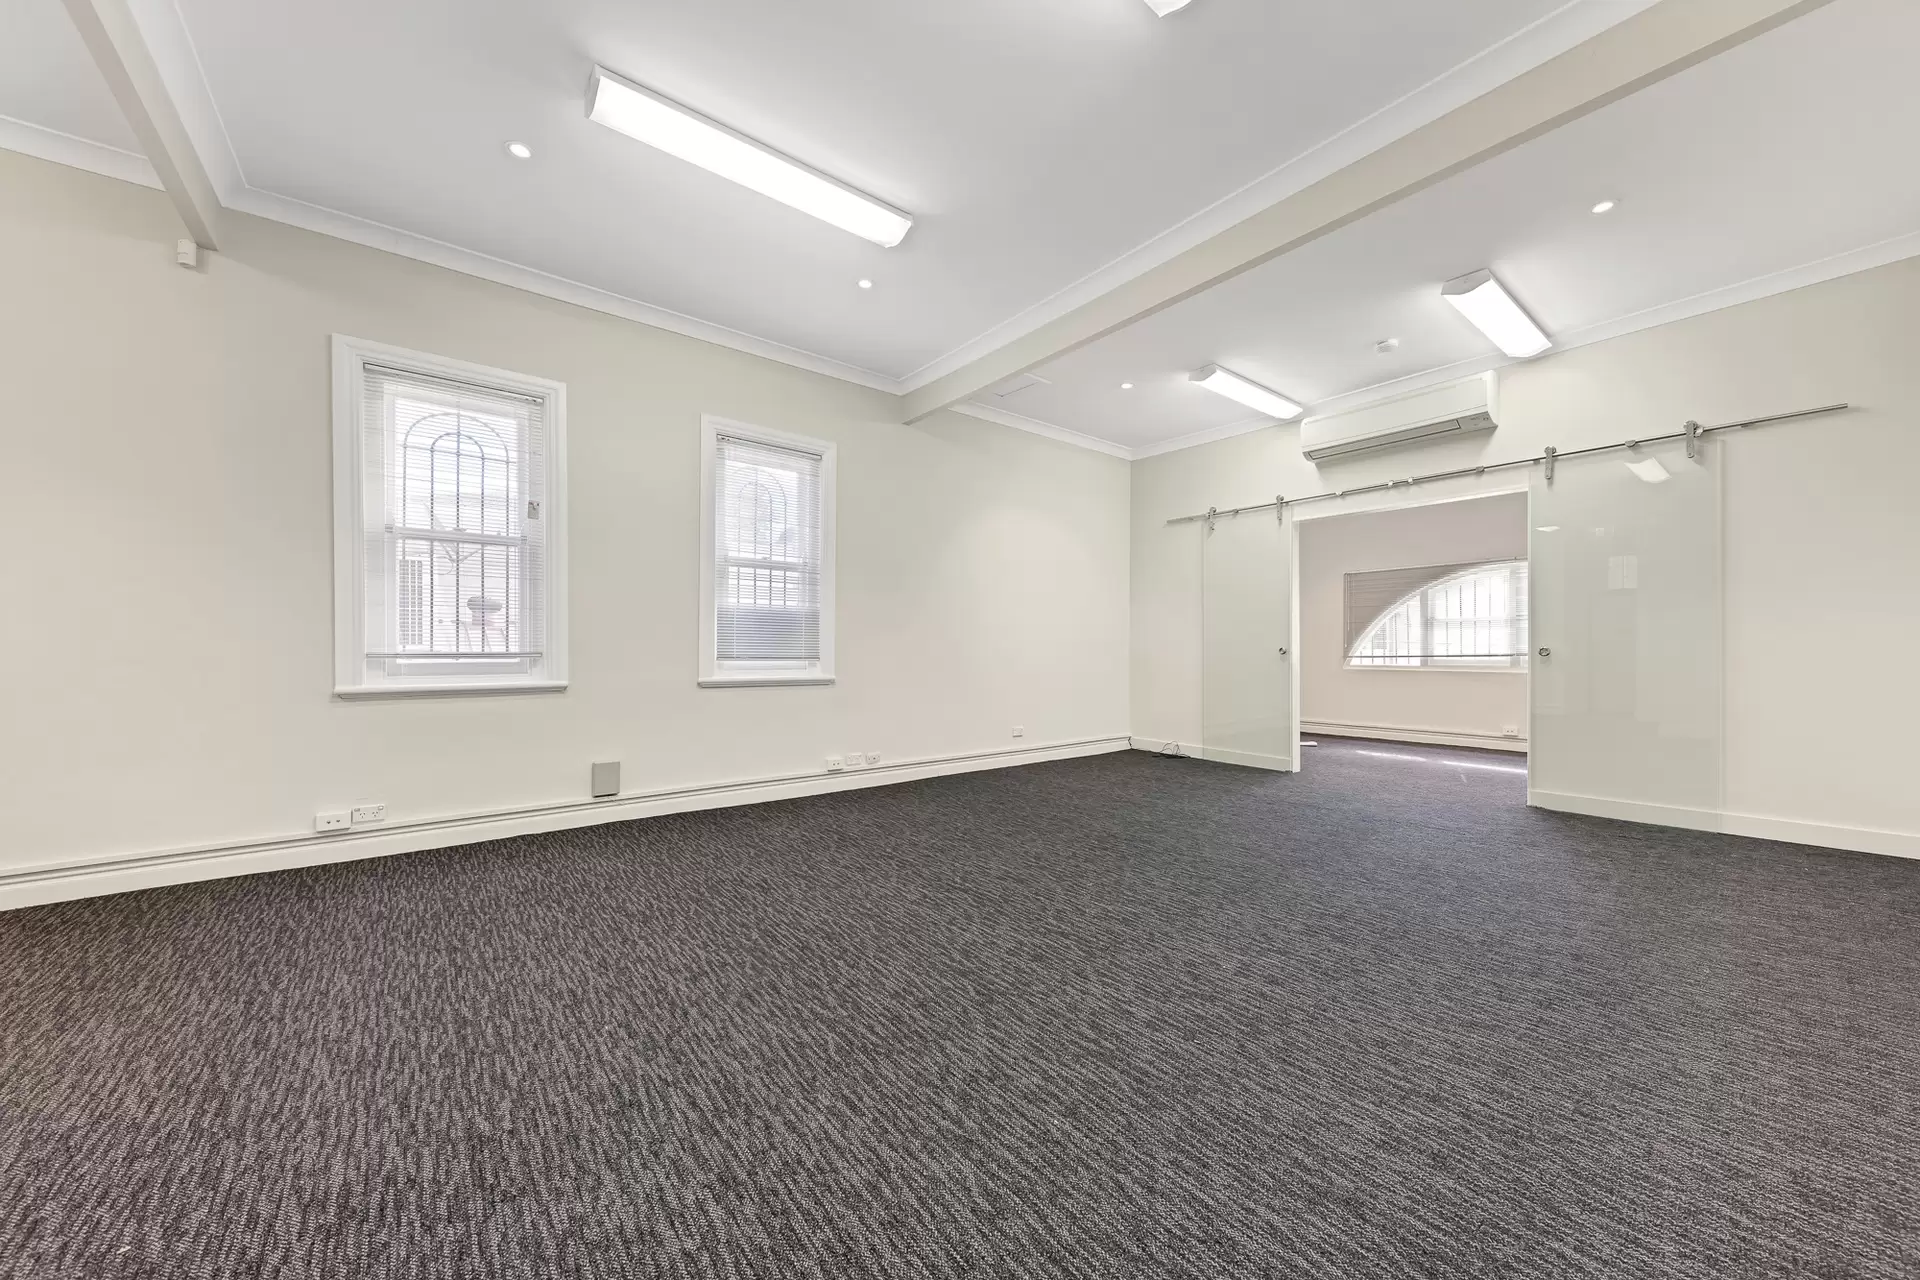 Wahroonga Leased by Shead Property - image 1